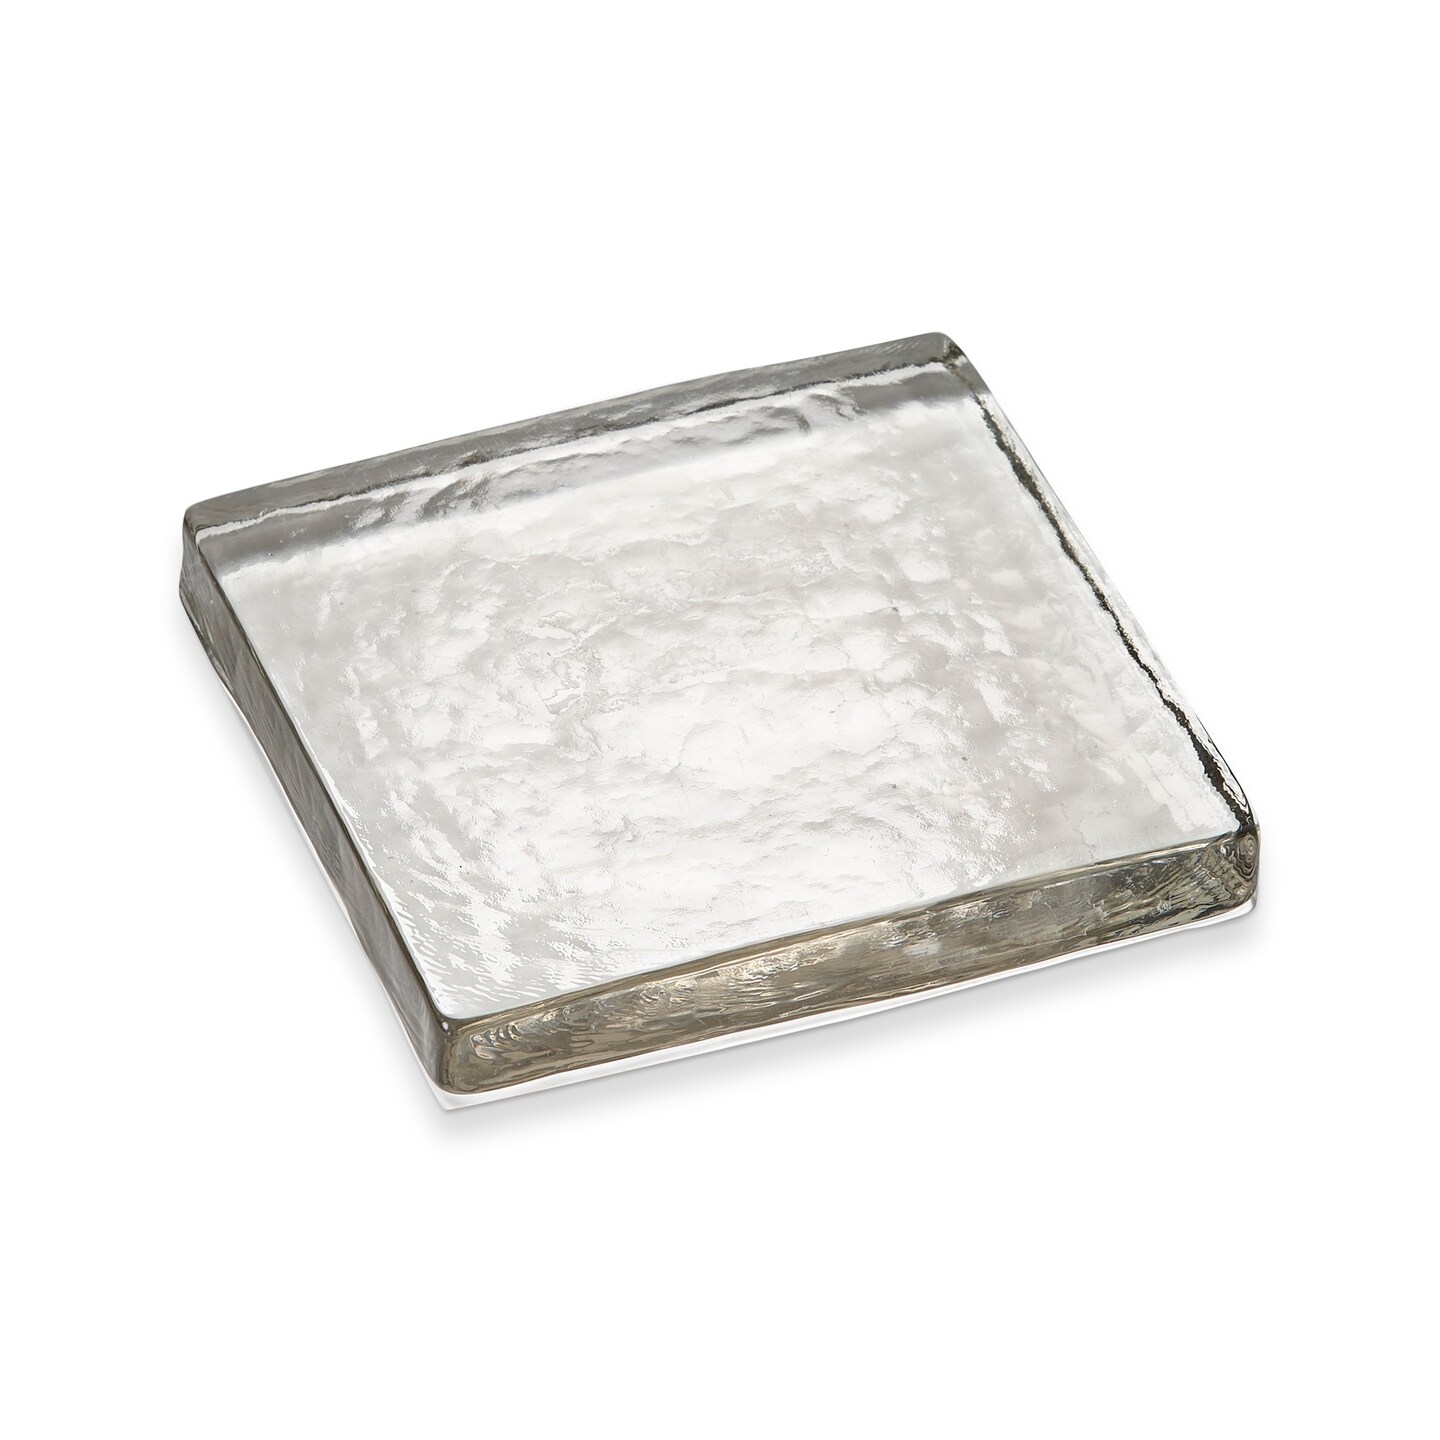 Glacier Clear Glass Square Candle Plate Candler Holder Large, 6.75 inch.